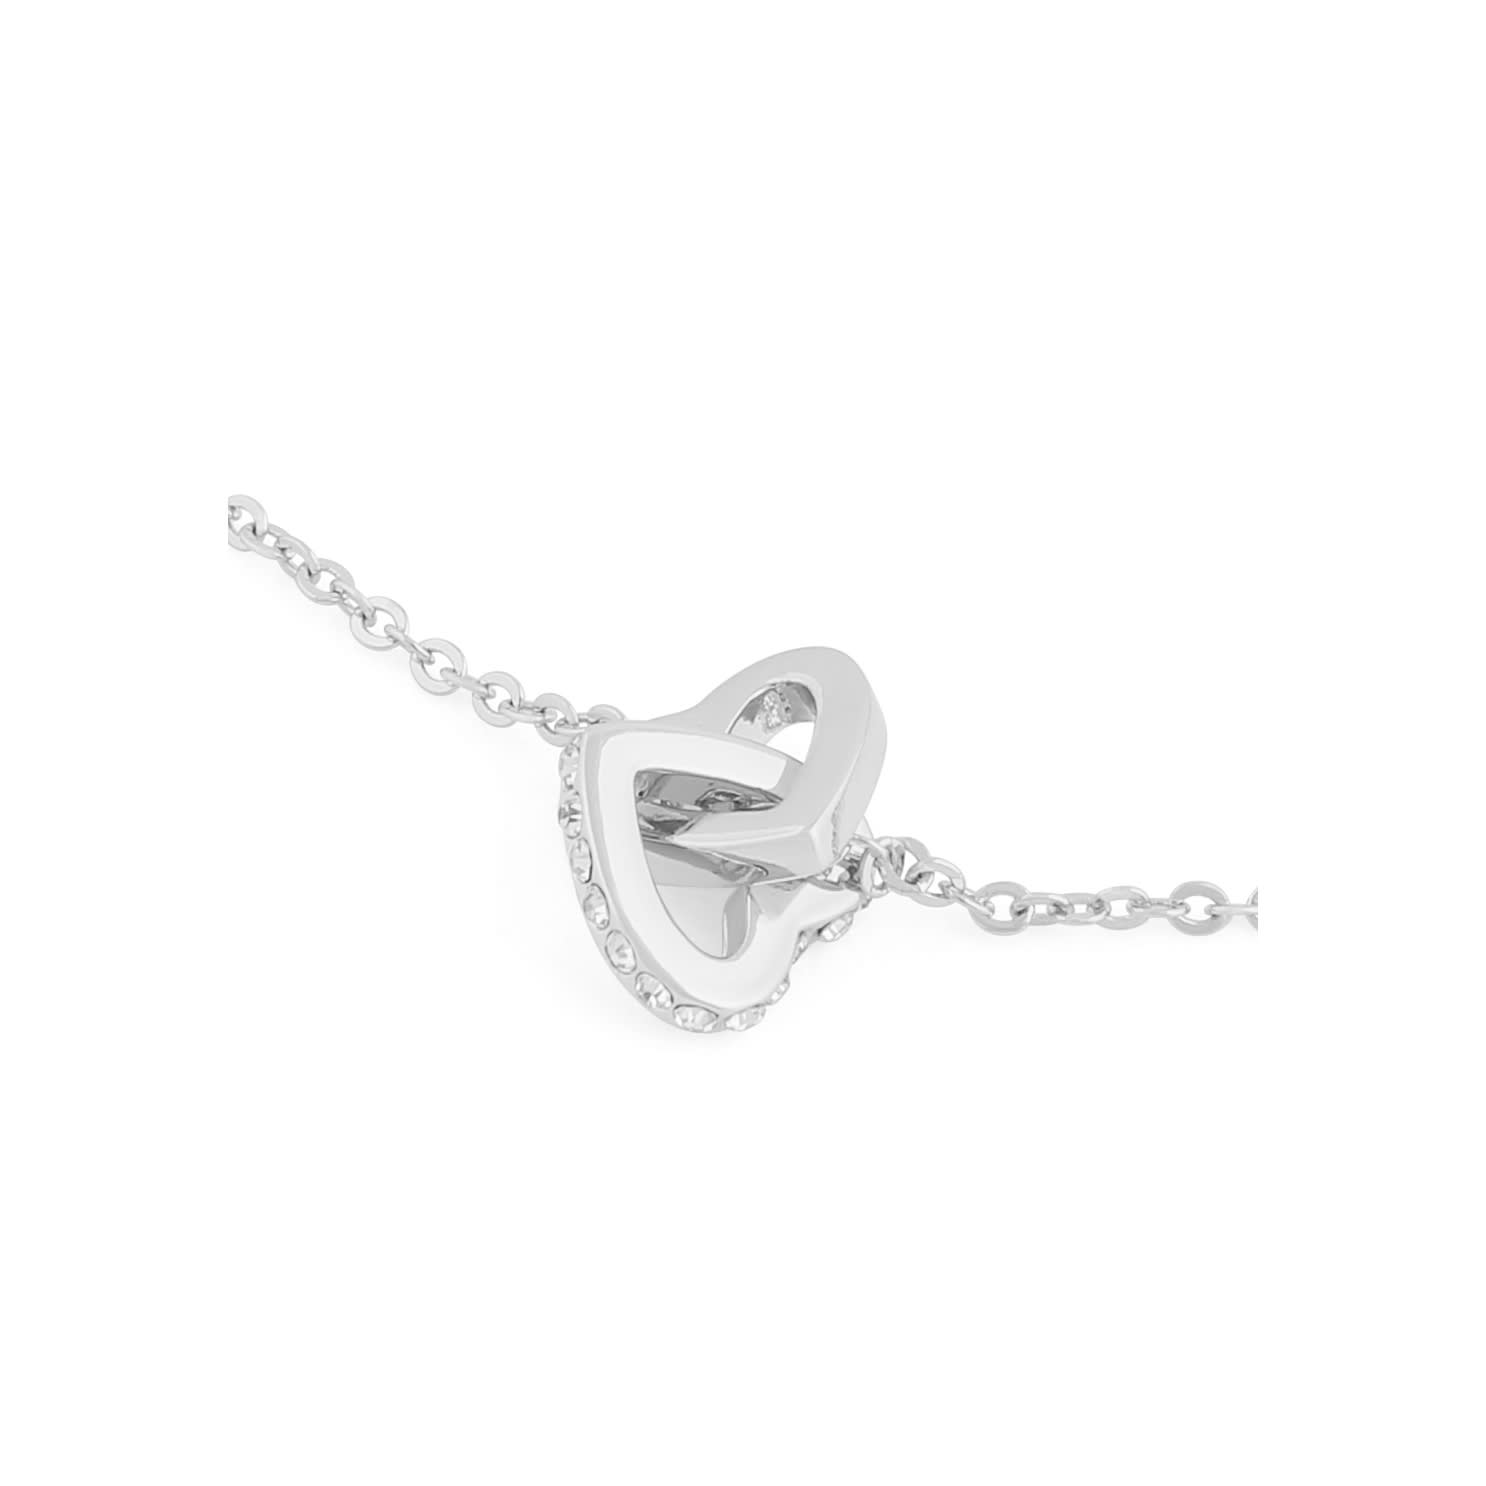 Connected Pendant Heart Necklace